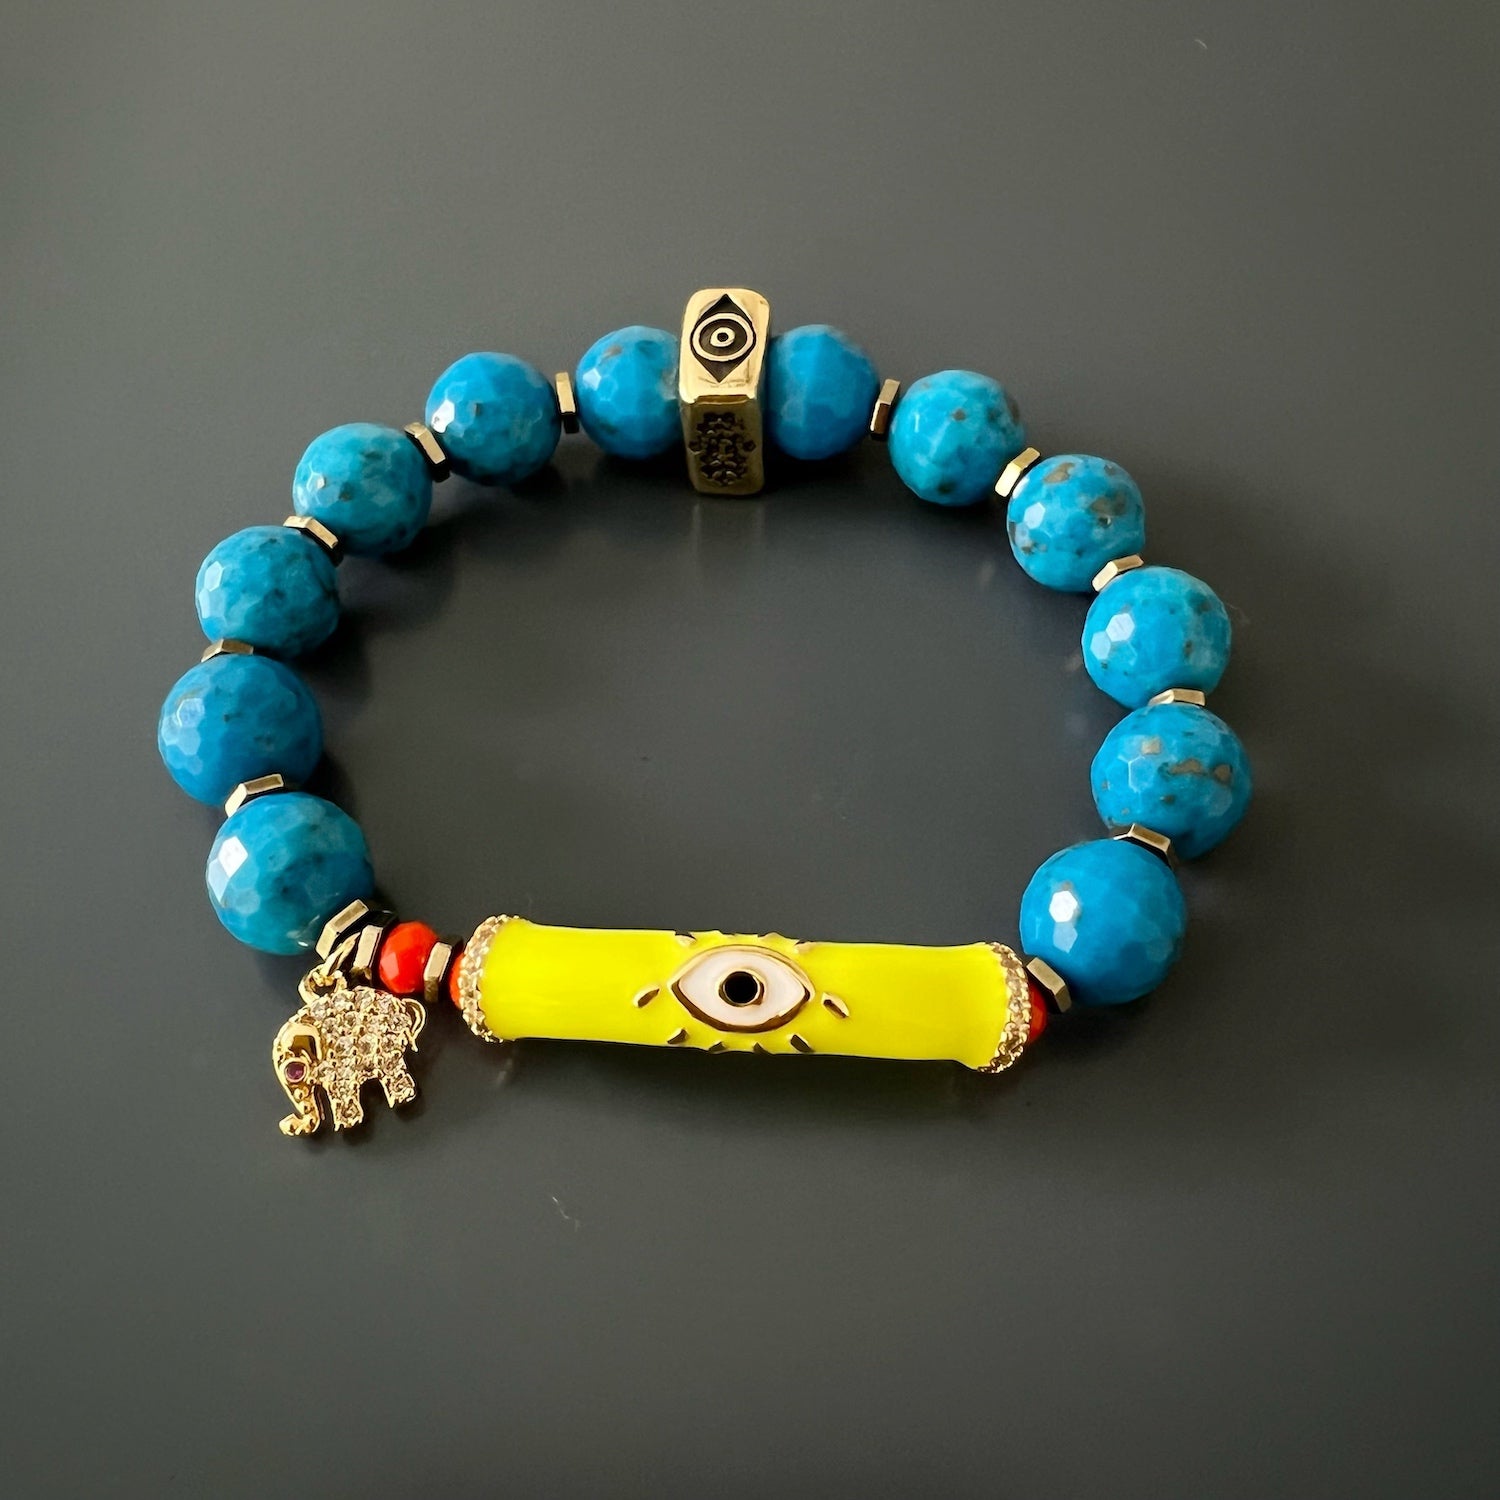 Explore the symbolism of protection with the Turquoise Unique Protection Bracelet, featuring powerful symbols and a turquoise centerpiece.